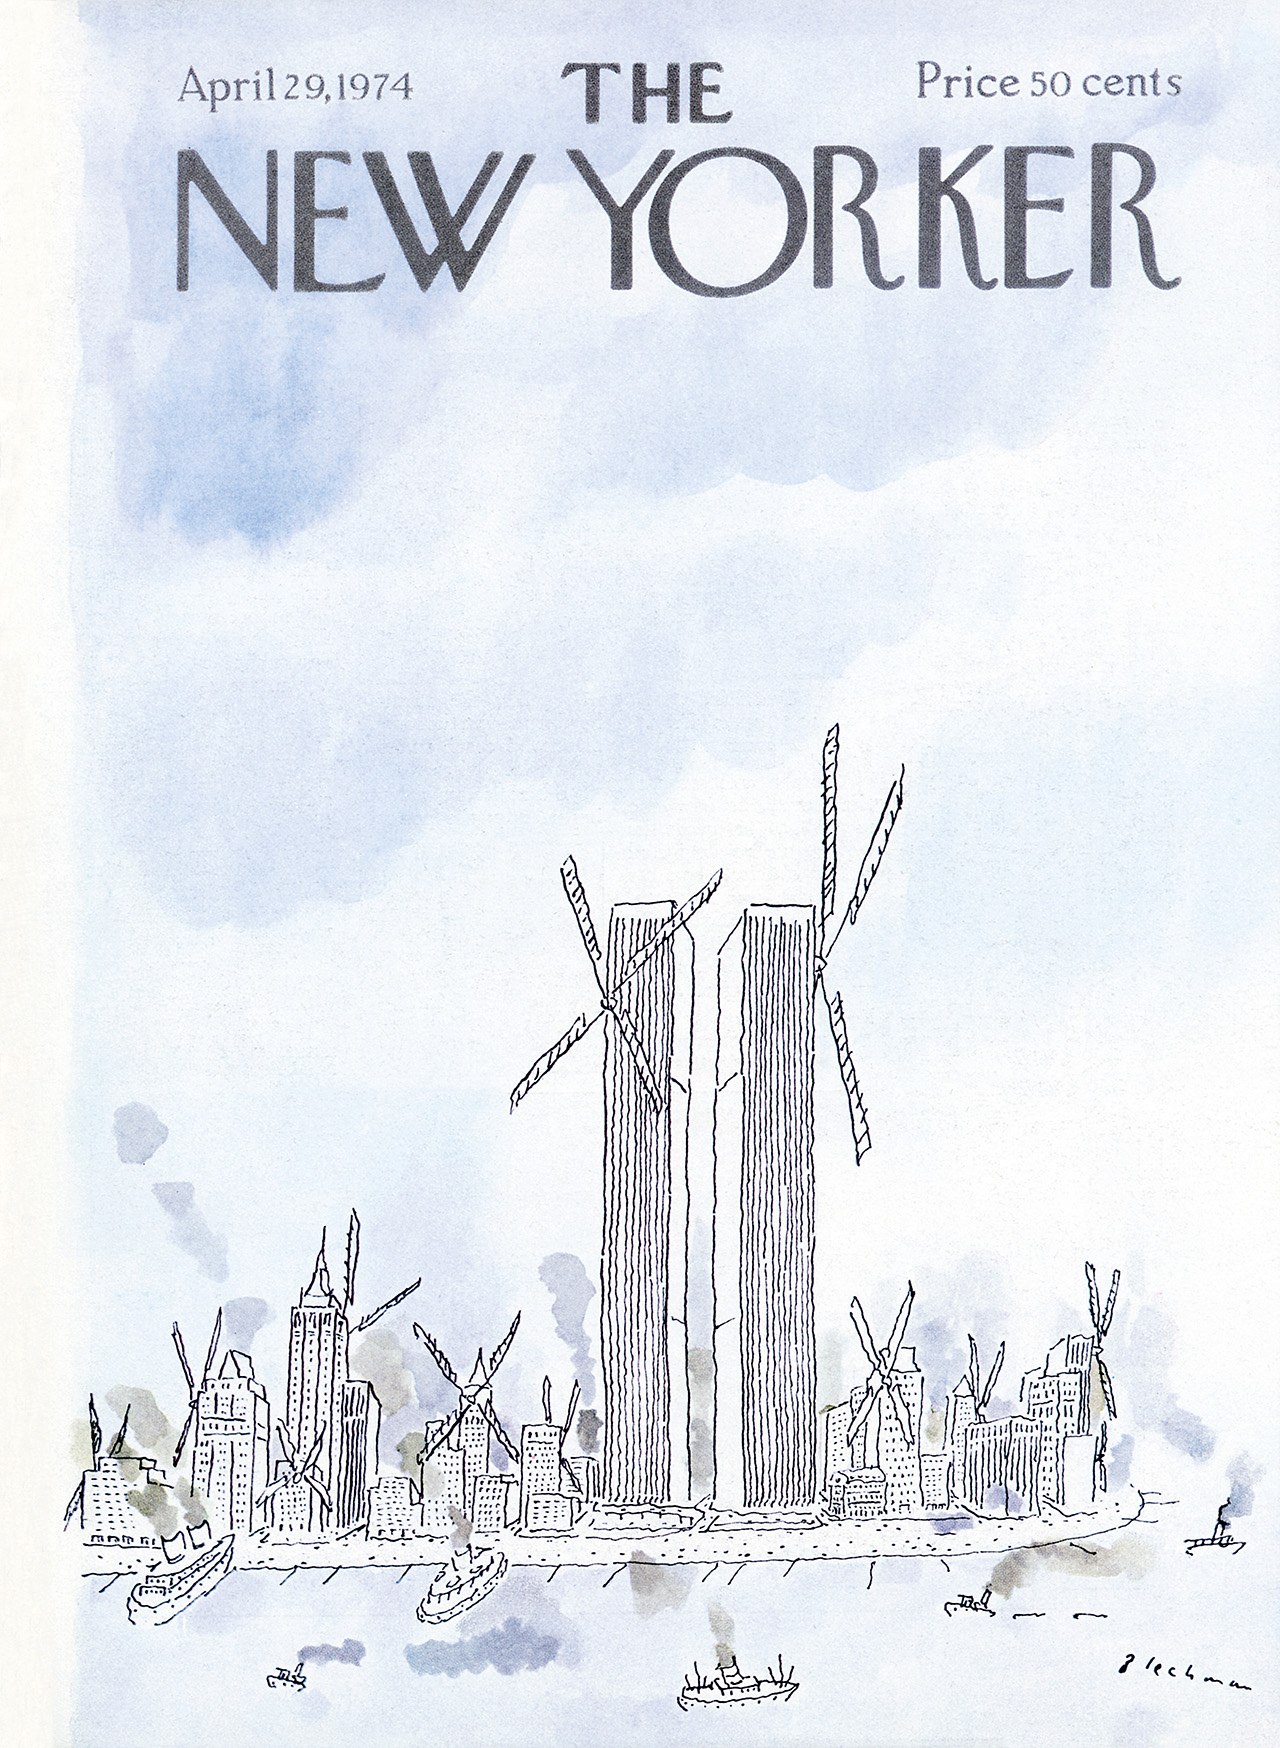 An illustrated cover of the New Yorker magazine from 1974 depicts the Twin Towers and other buildings on the Manhattan skyline as windmills, a reference to New York’s Dutch origins.